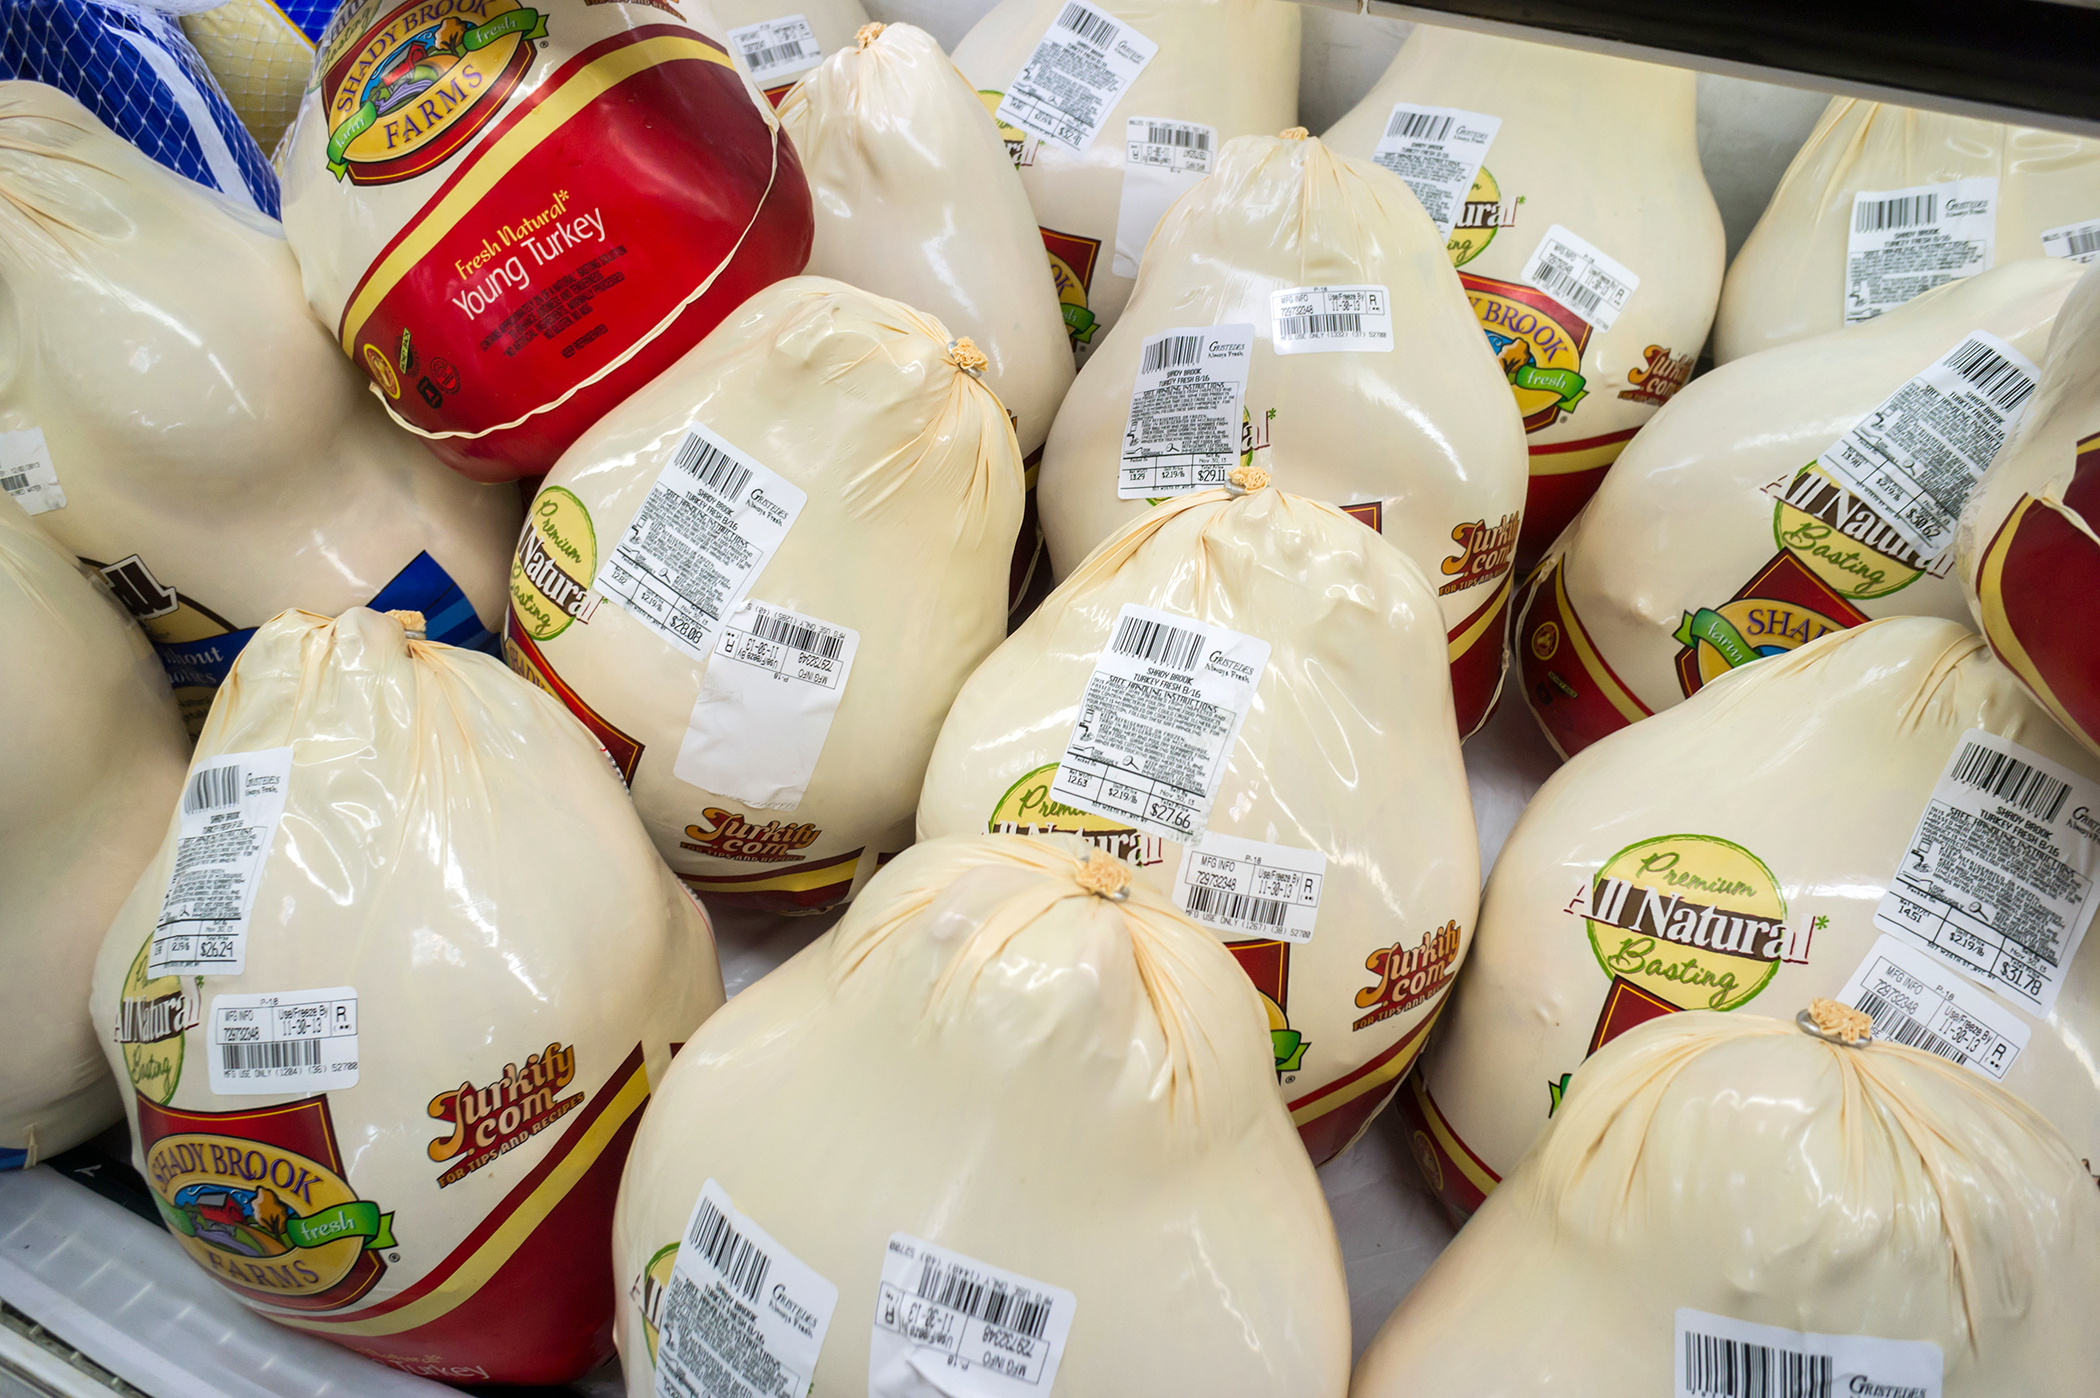 Shady Brook Farms brand Turkeys for sale in a supermarket refrigerator in New York